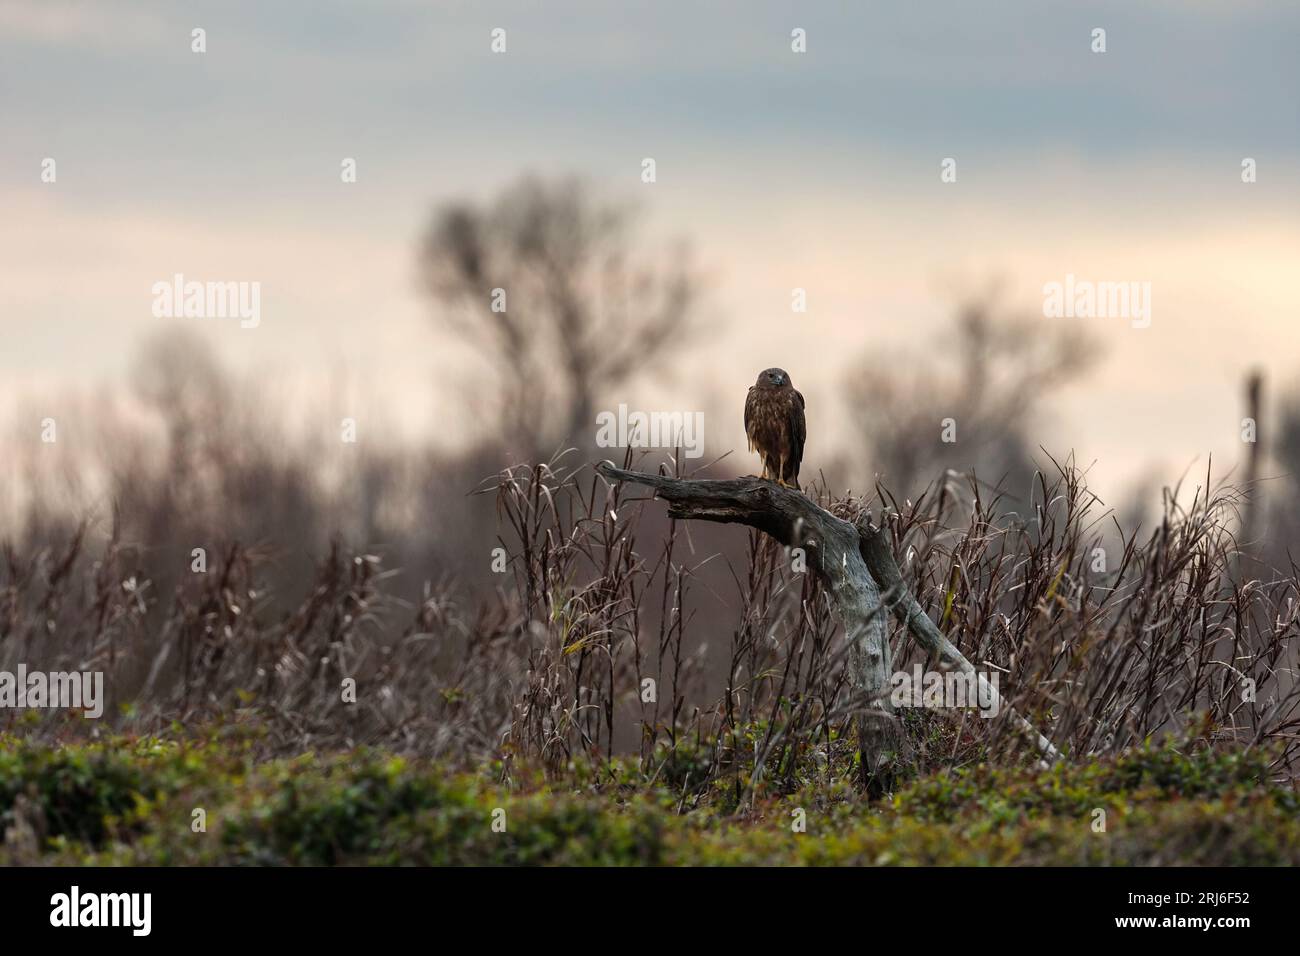 A Swamp Harrier - Circus approximans - standing on an old tree stump surrounded by its natural environment, Whangamarino Wetland in New Zealand Stock Photo